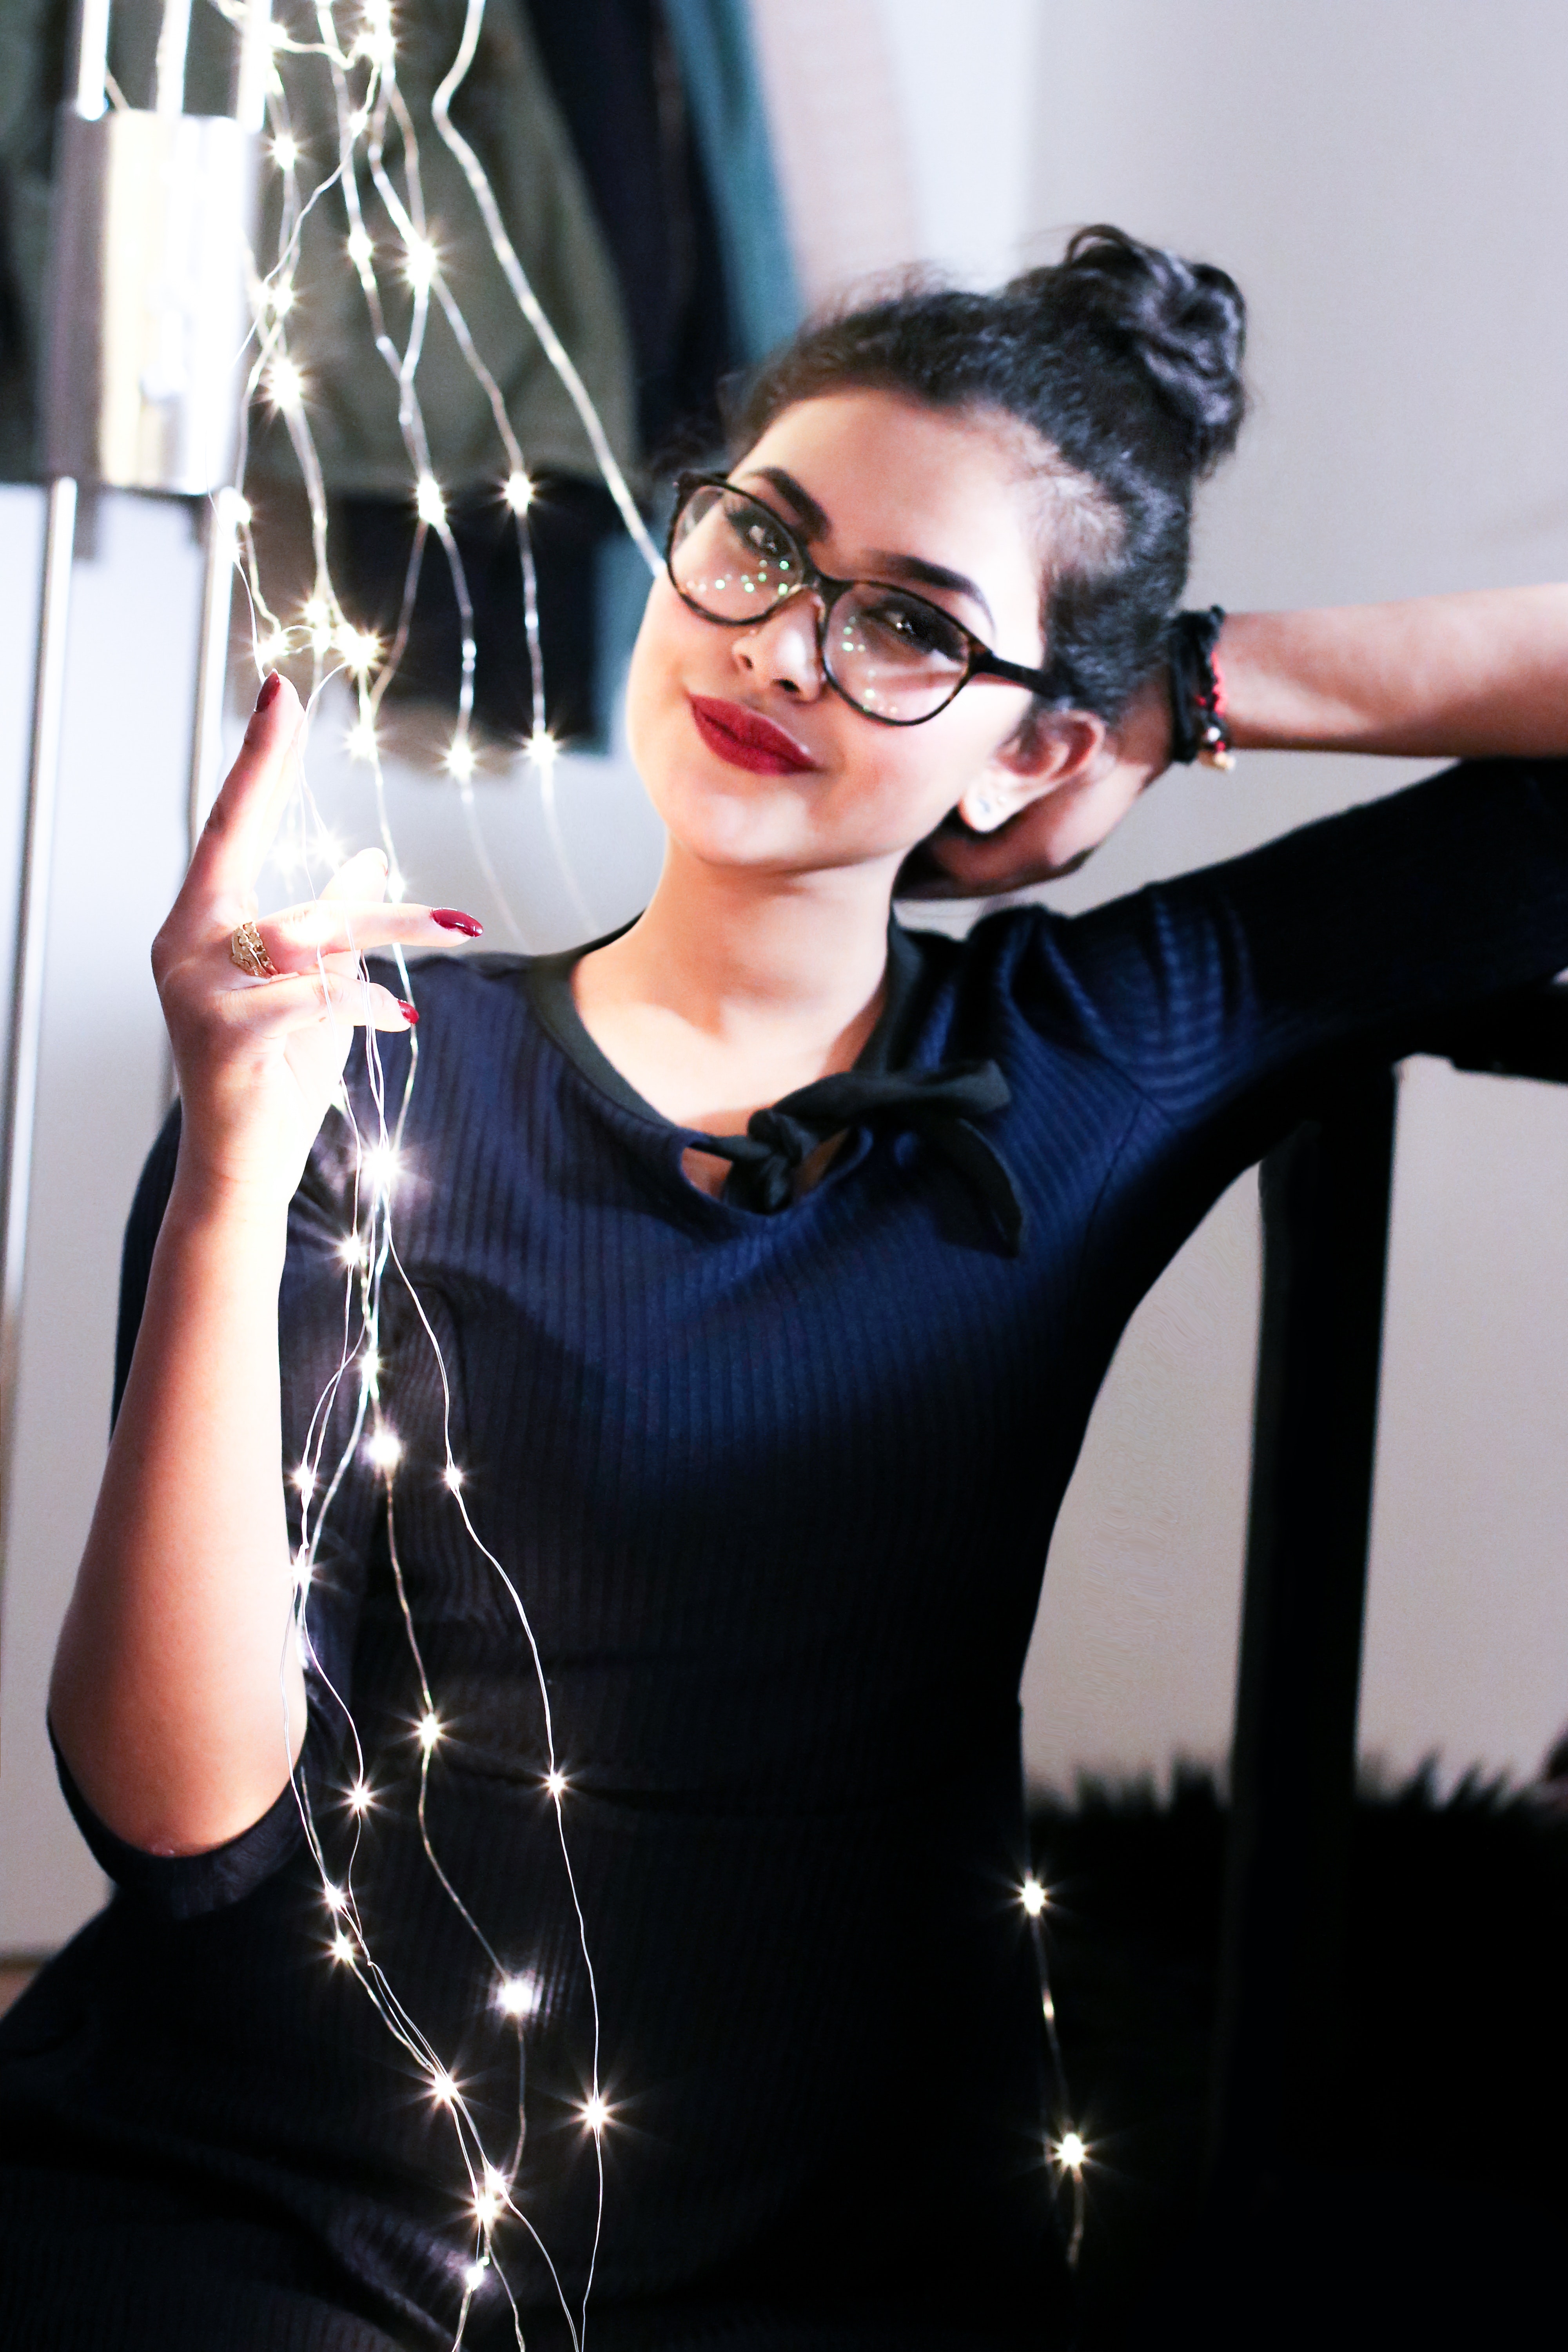 Woman wearing black knit elbow-sleeved top touching mini string lights photo